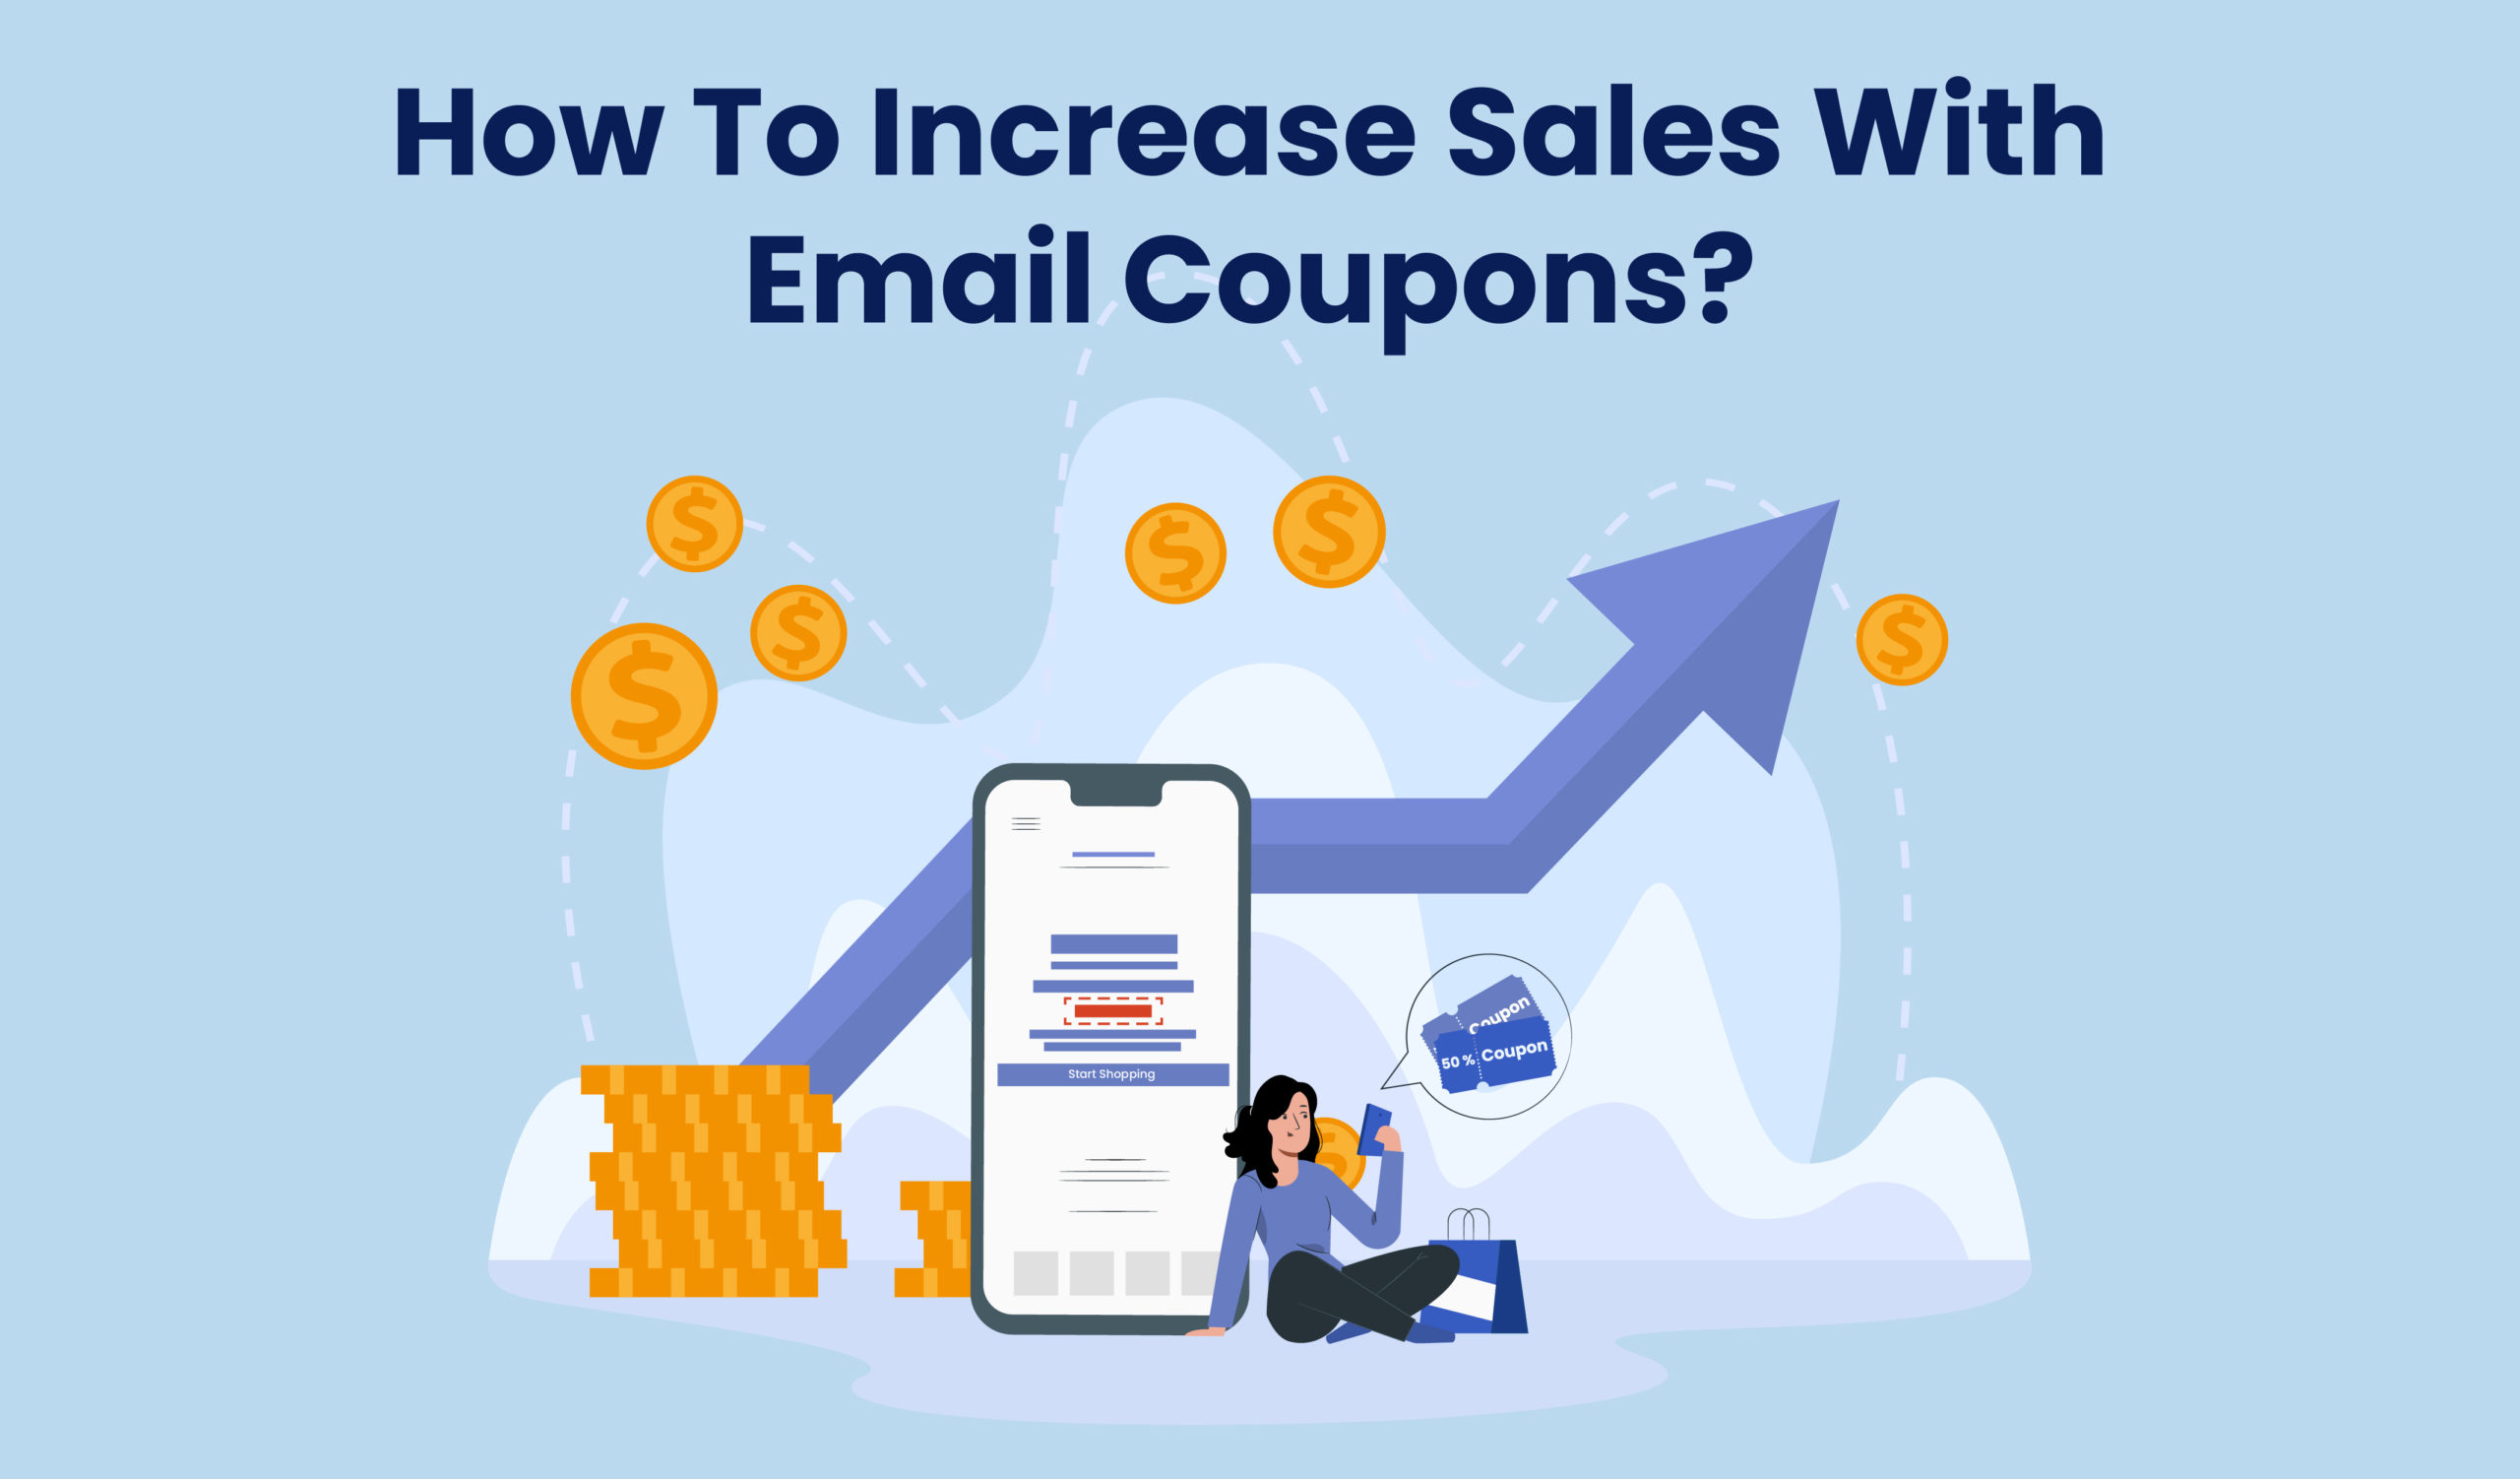 How to increase sales with email coupons?